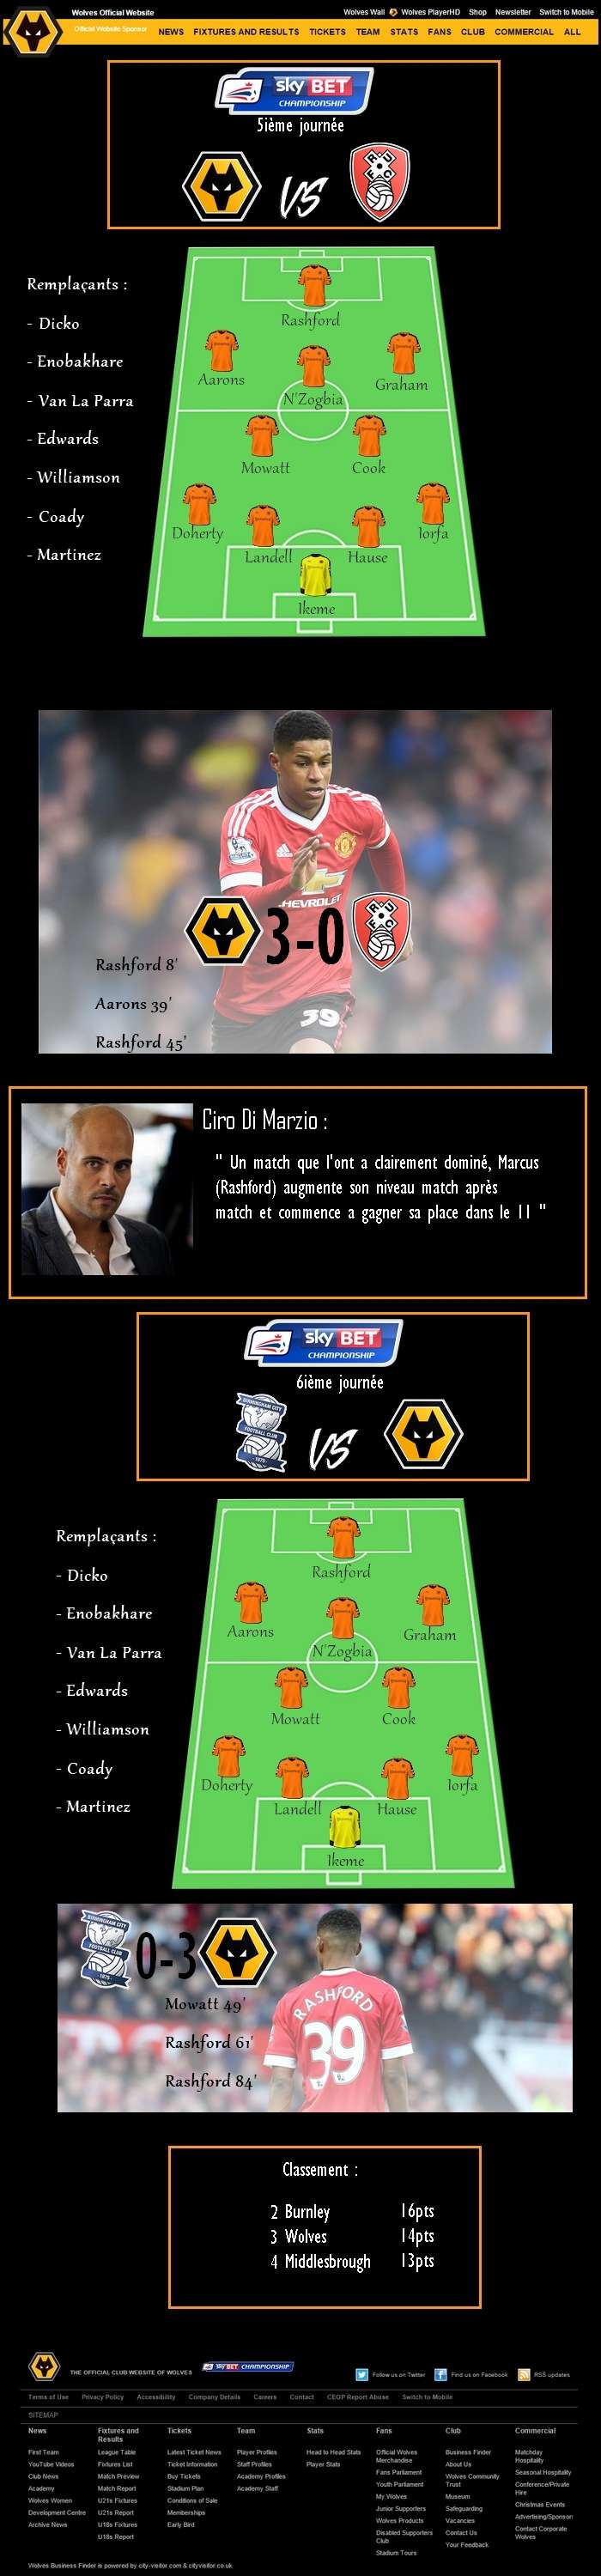 [Wolverhampton] Ciro Di Marzio and Wolves, Let's Go To PL !  - Page 8 Wfc1210